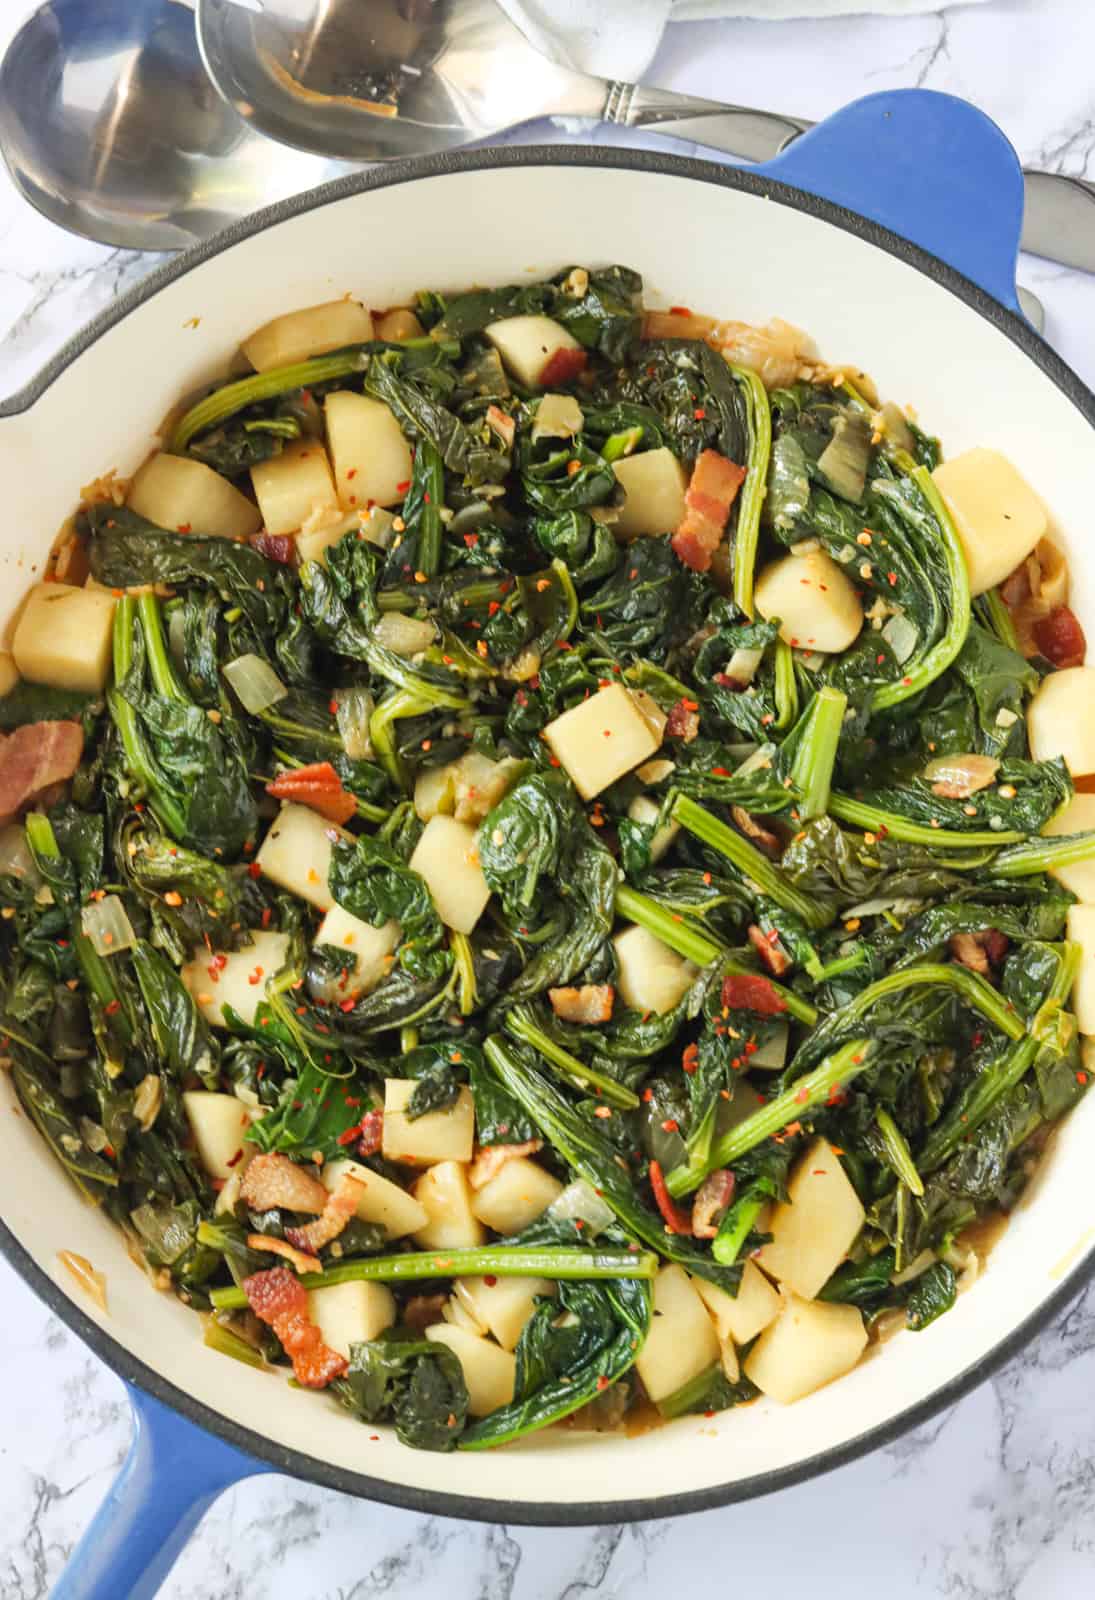 A pan full of turnips, their greens, and bacon.